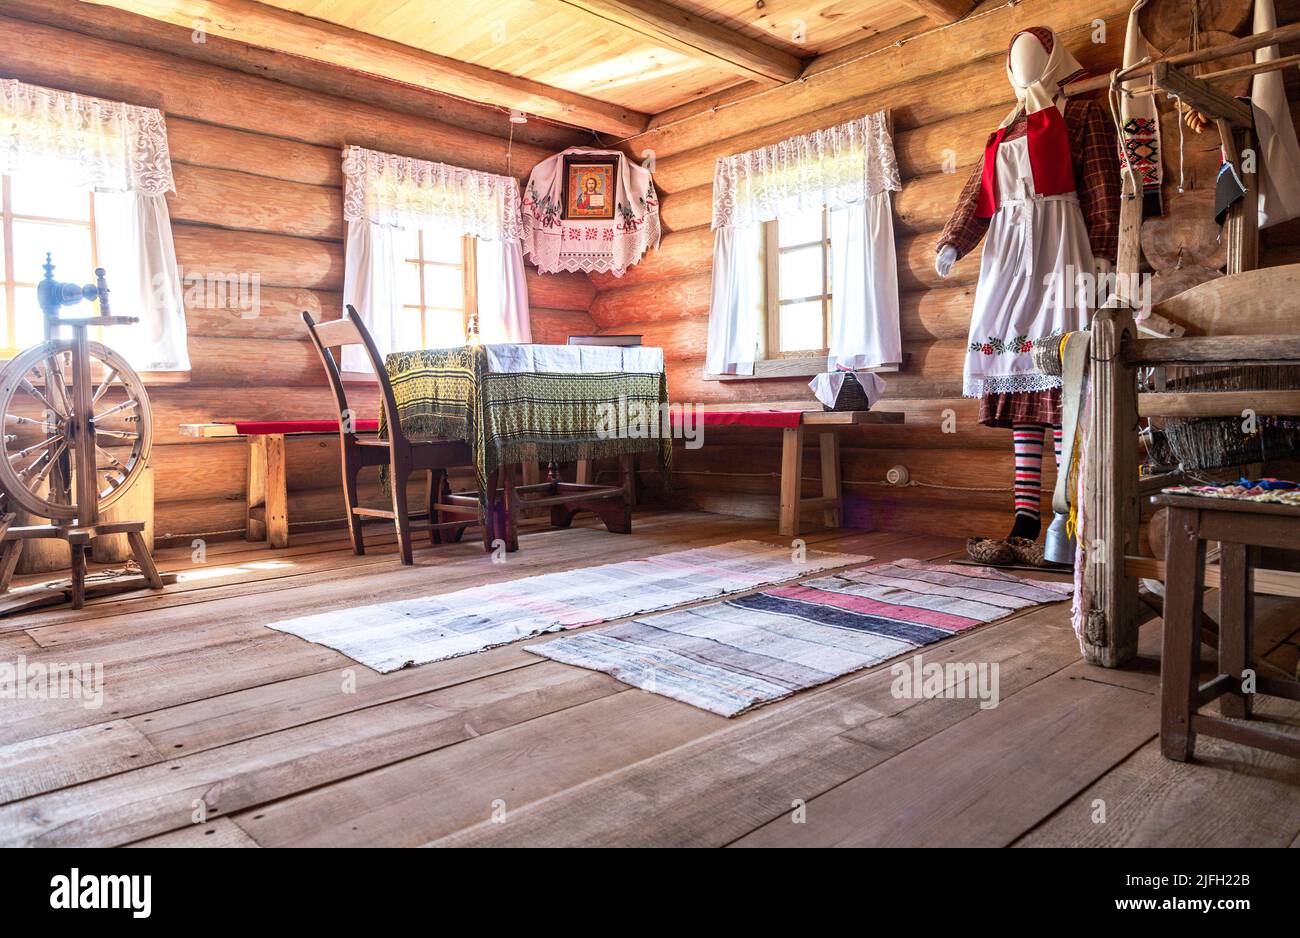 Samara, Russia - September 25, 2021: Ethnocultural complex 'People's Friendship Park'. Interior of traditional Udmurt wooden house built from wood log Stock Photo